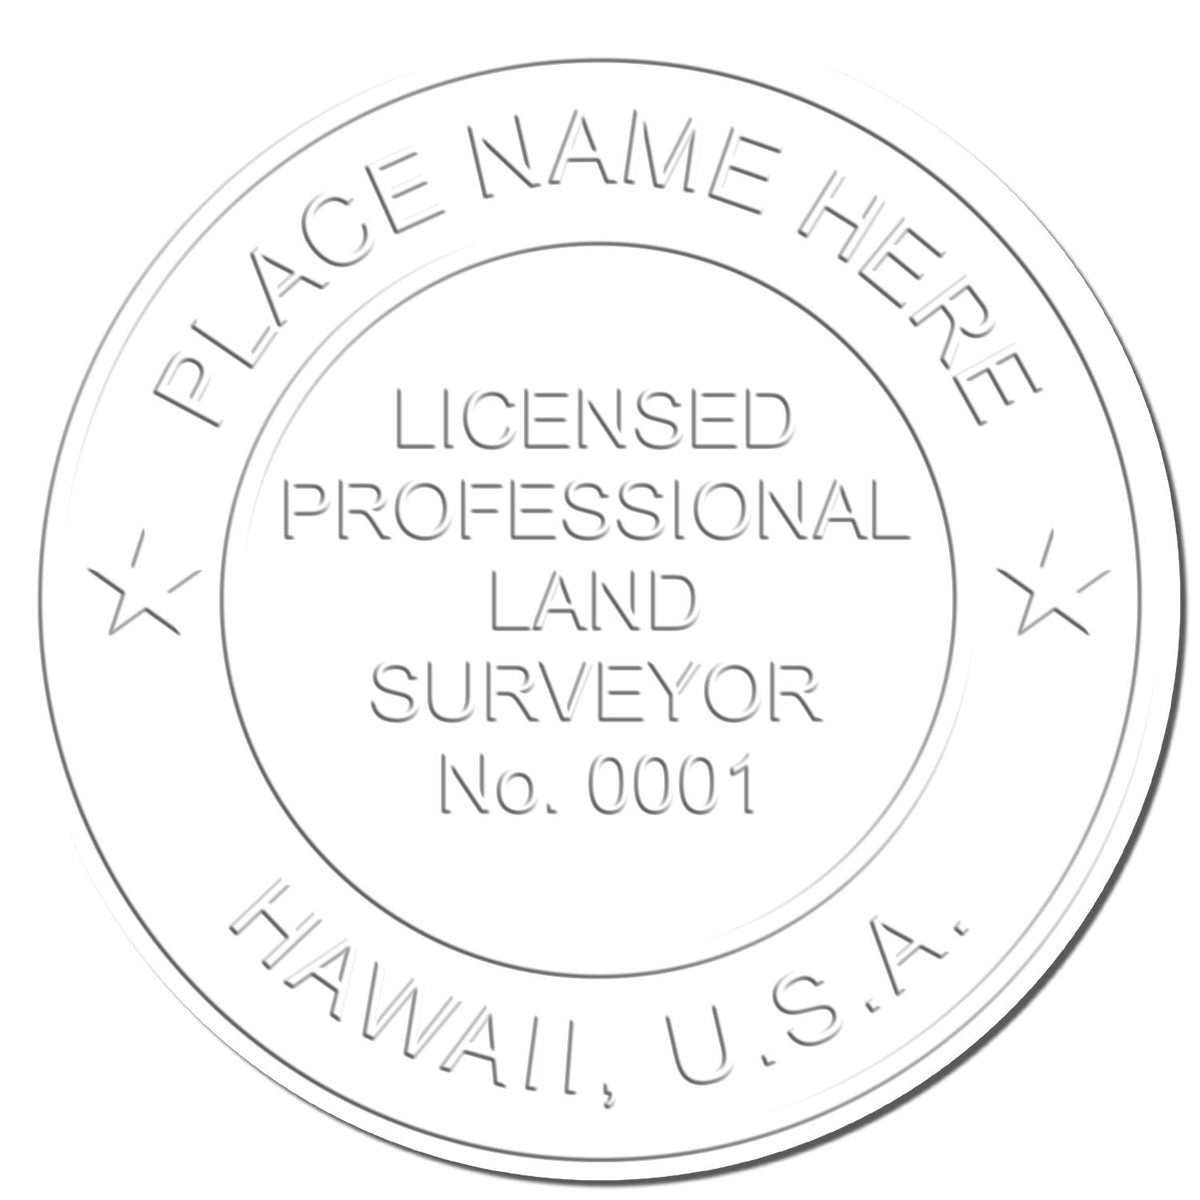 This paper is stamped with a sample imprint of the Heavy Duty Cast Iron Hawaii Land Surveyor Seal Embosser, signifying its quality and reliability.